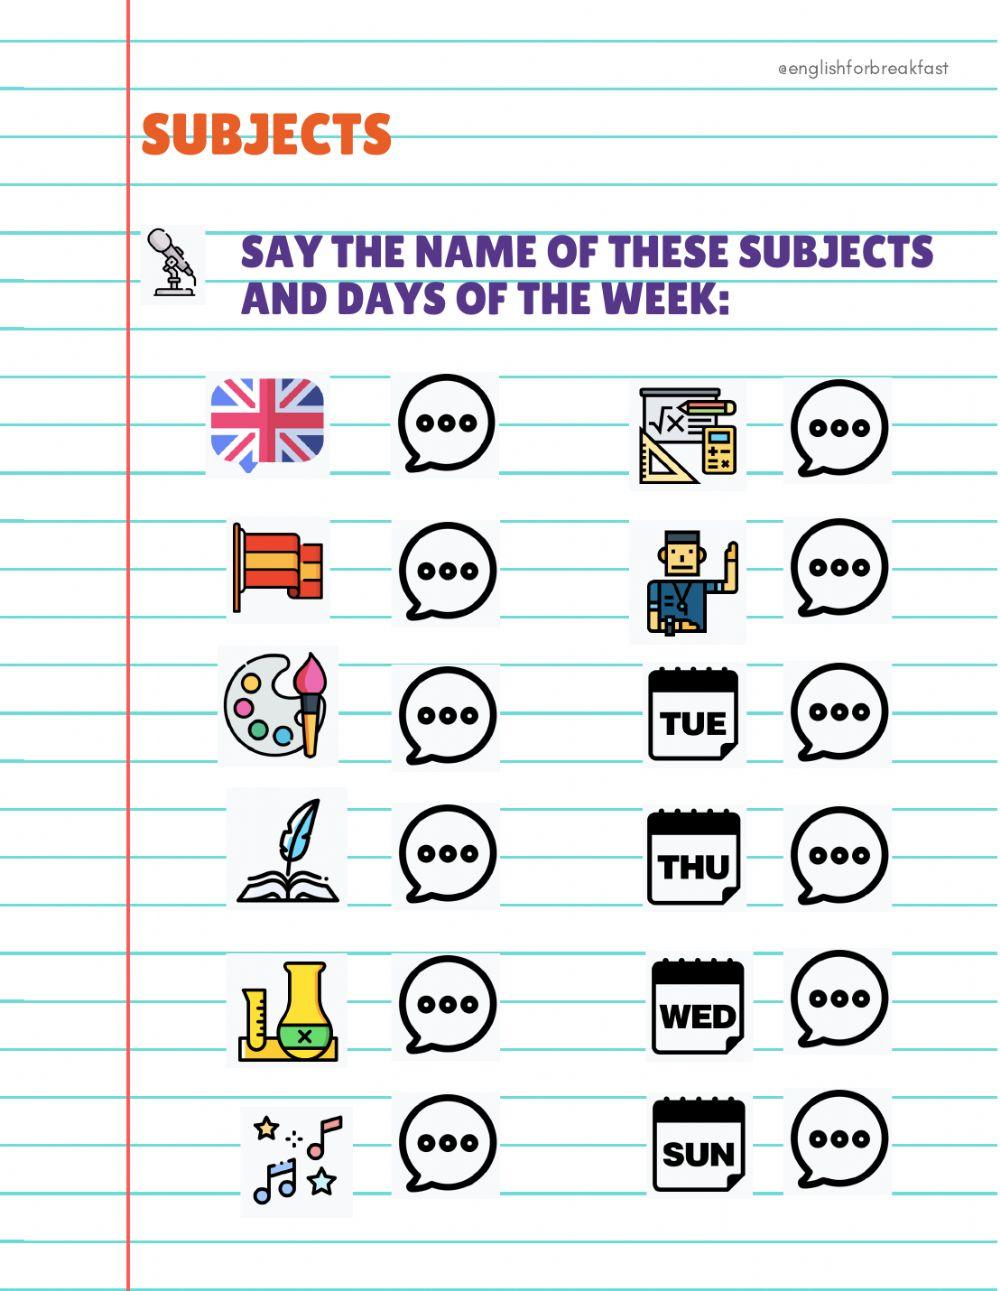 Subjects and days of the week